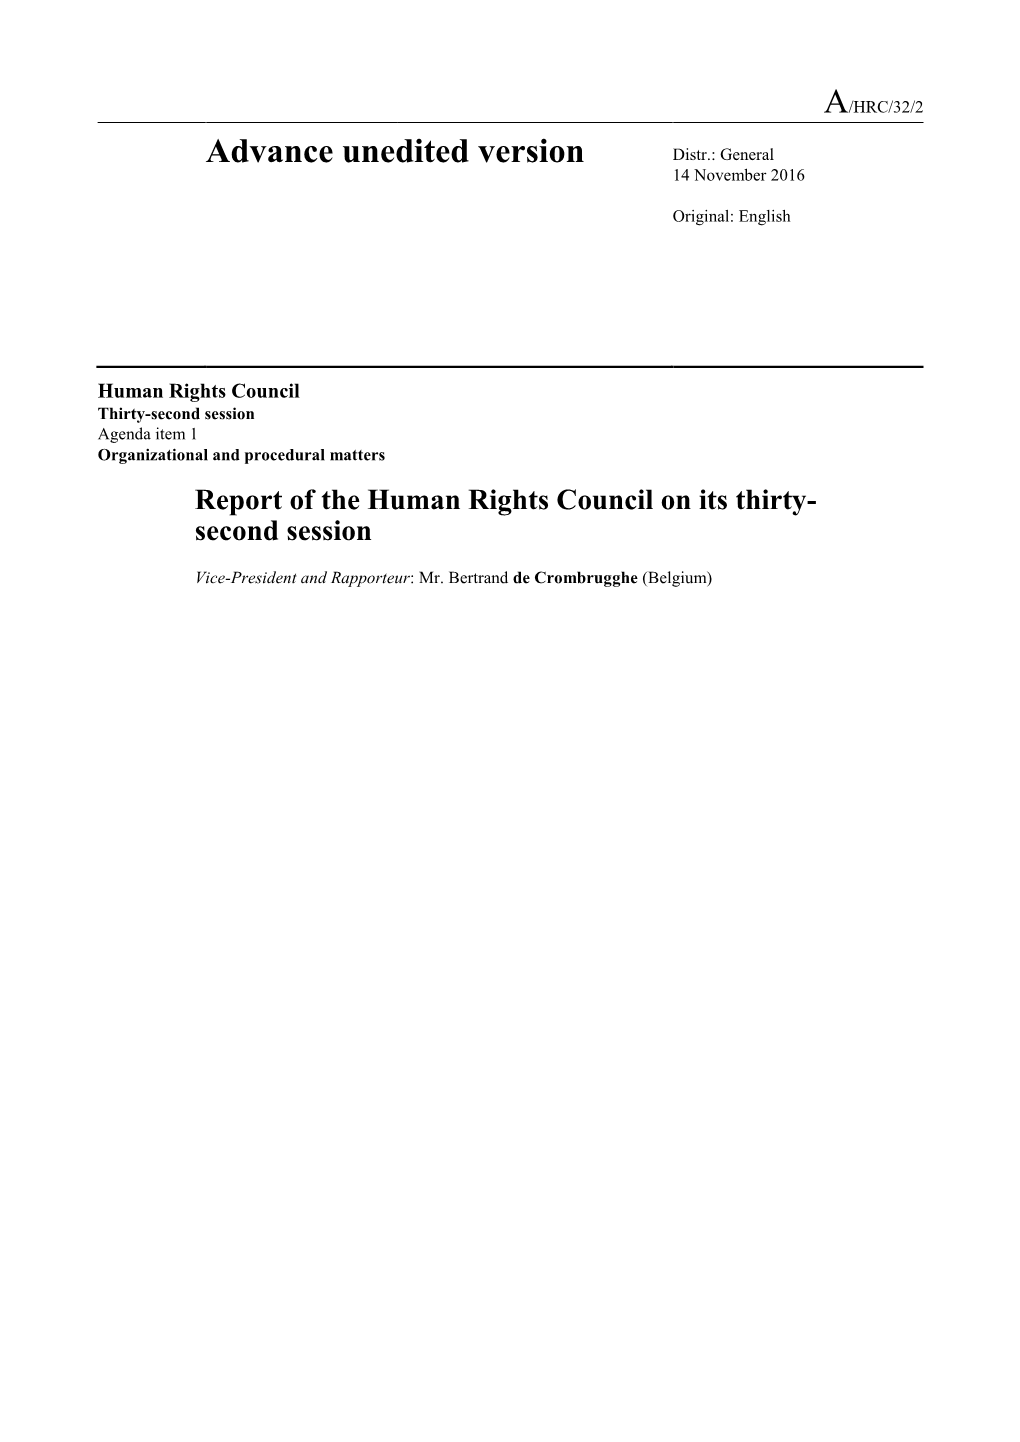 A/HRC/32/2: Report of the Human Rights Council on Its Thirty-Second Session